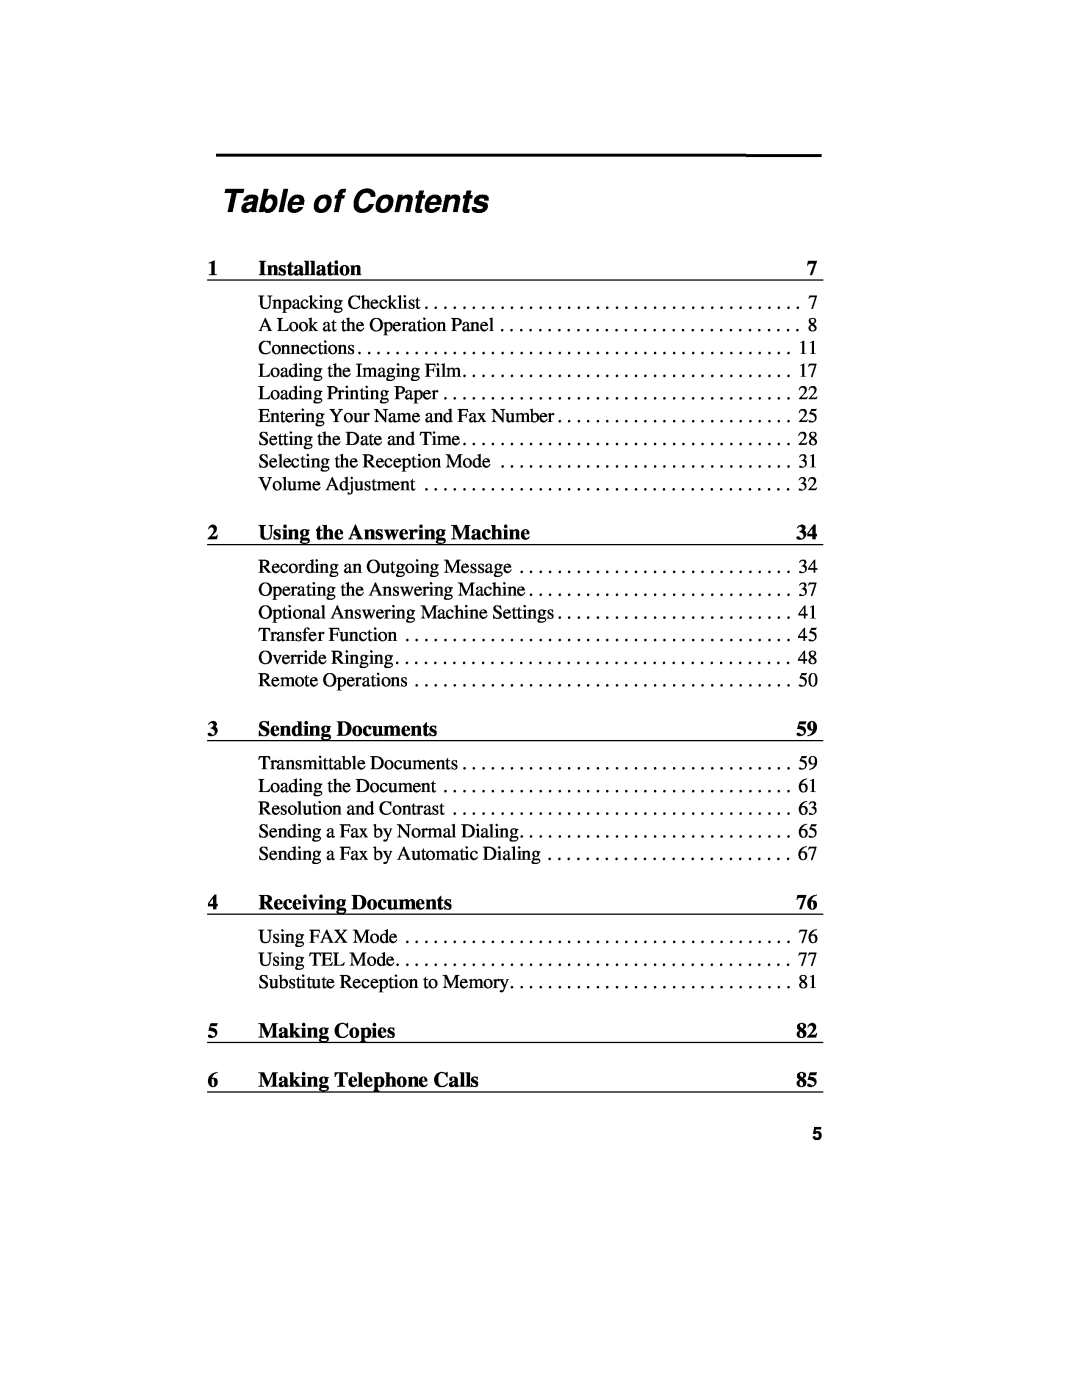 Sharp UX-460 Table of Contents, Installation, Using the Answering Machine, Sending Documents, Receiving Documents 